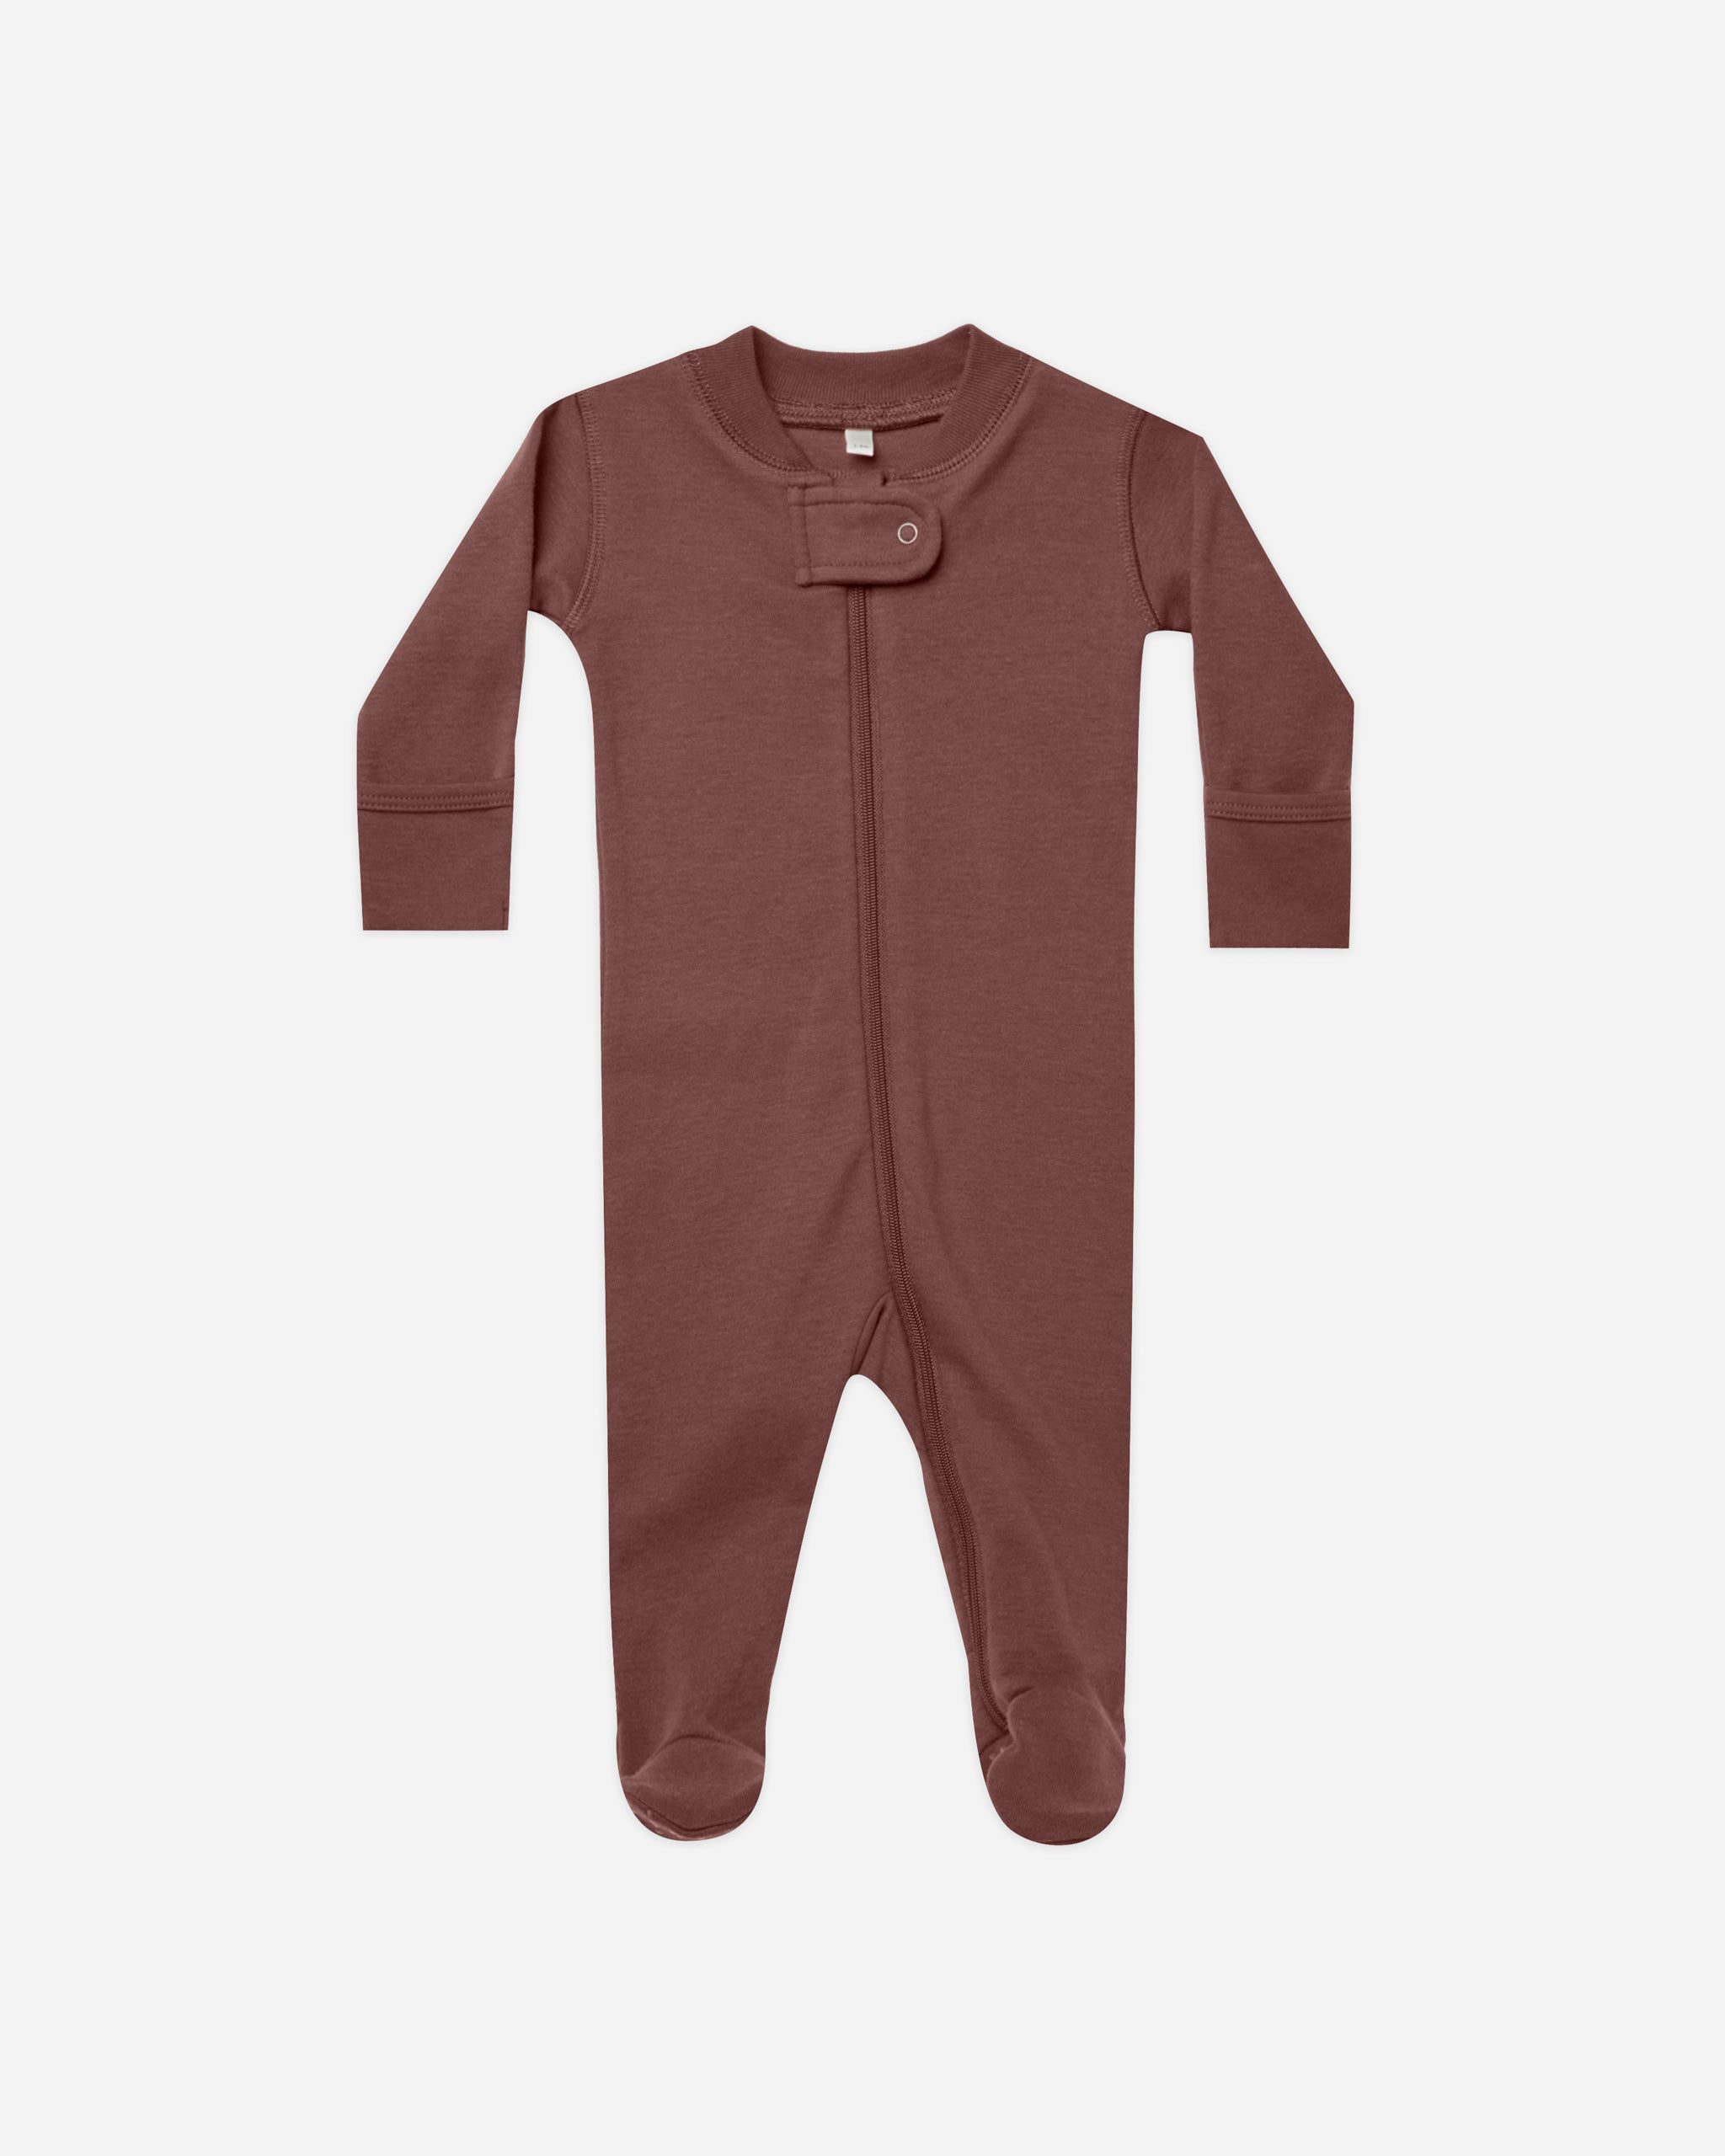 Zip Long Sleeve Sleeper Footie || Plum - Rylee + Cru | Kids Clothes | Trendy Baby Clothes | Modern Infant Outfits |